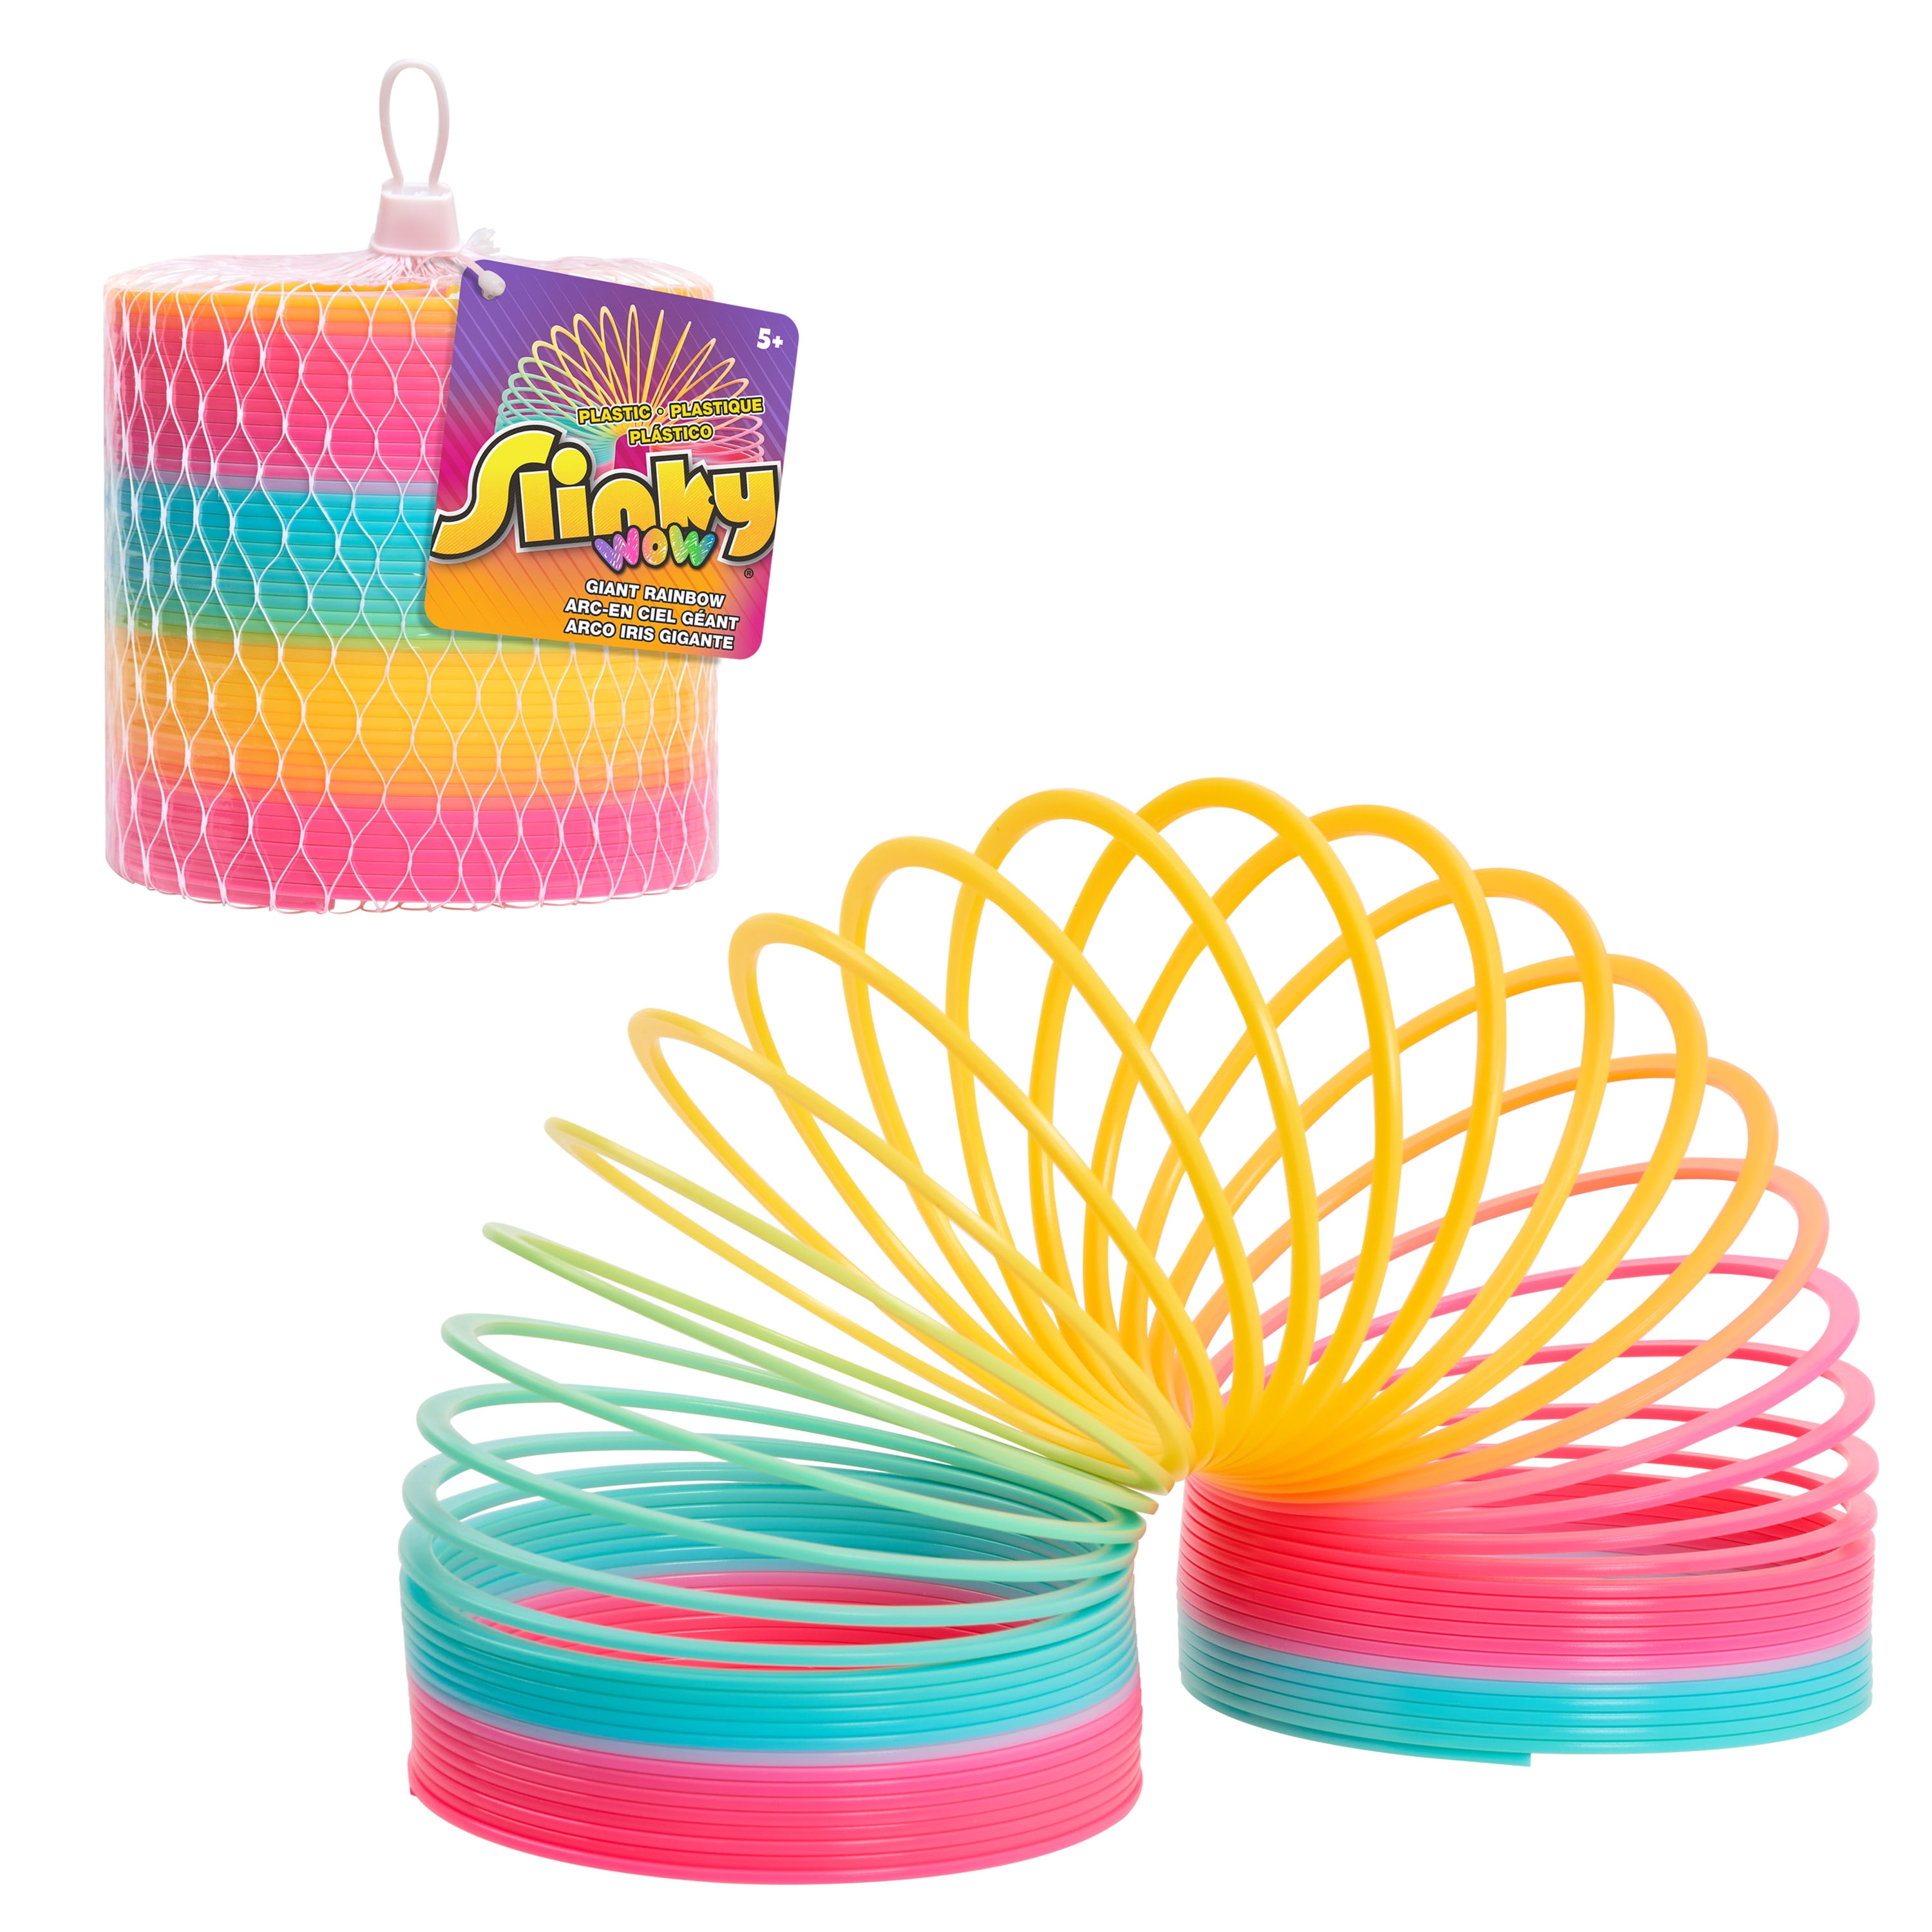 Slinky Cute Colorful Rainbow Plastic Magic Spring Children's Toy Educational toy 